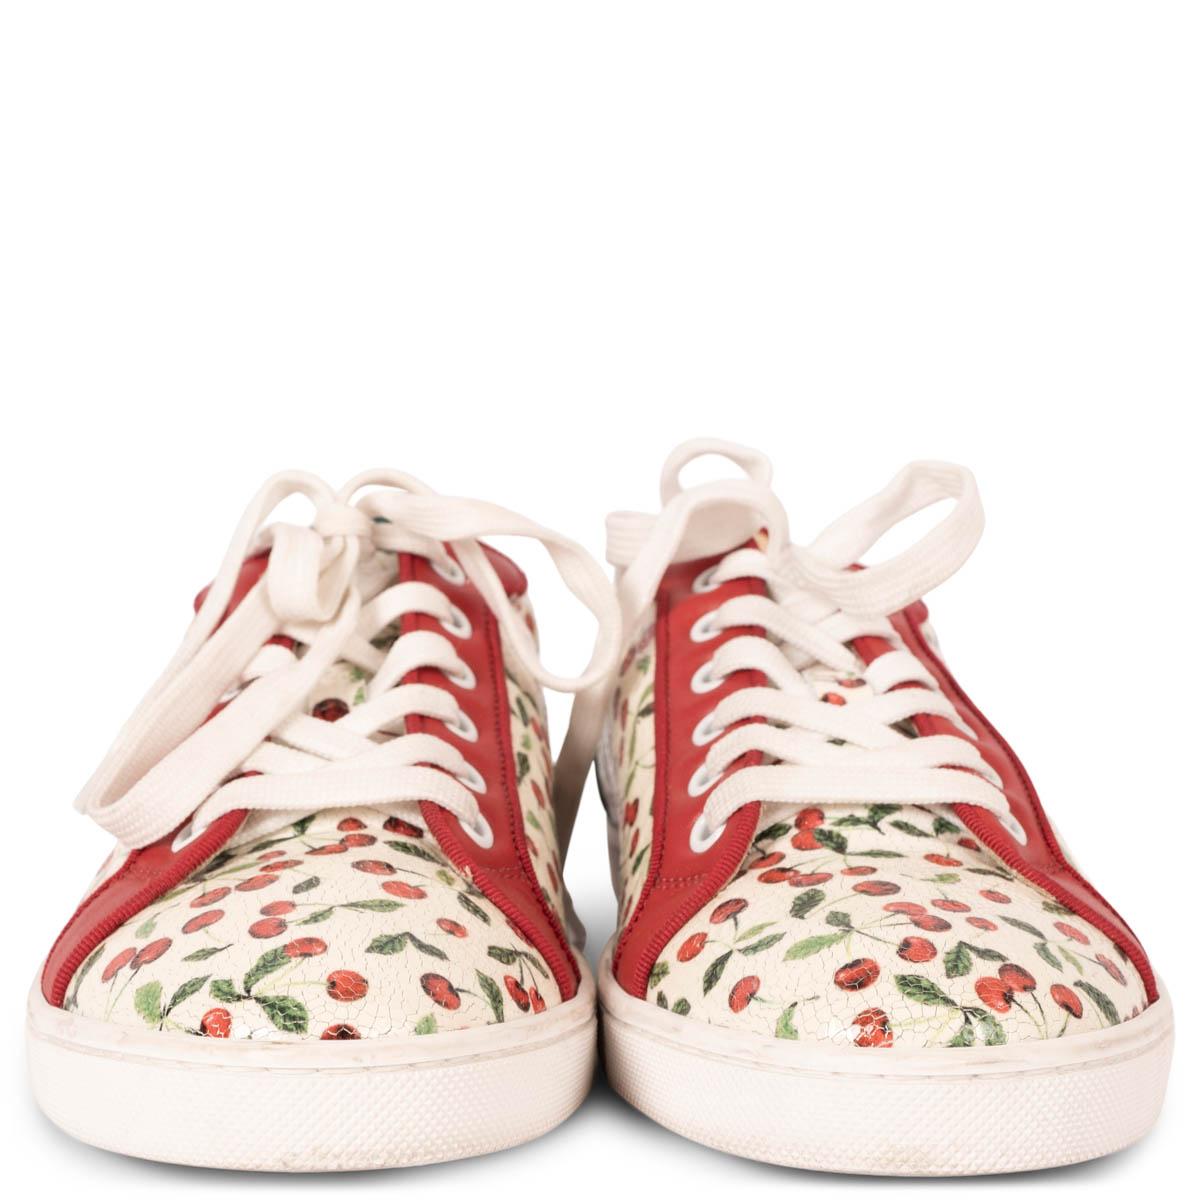 100% authentic Christian Louboutin 2017 Seava cherry print sneakers in cream shiny leather with a green metallic leather heel and red leather accents. Have been worn and are in excellent condition. Come with dust bag. 

Measurements
Imprinted